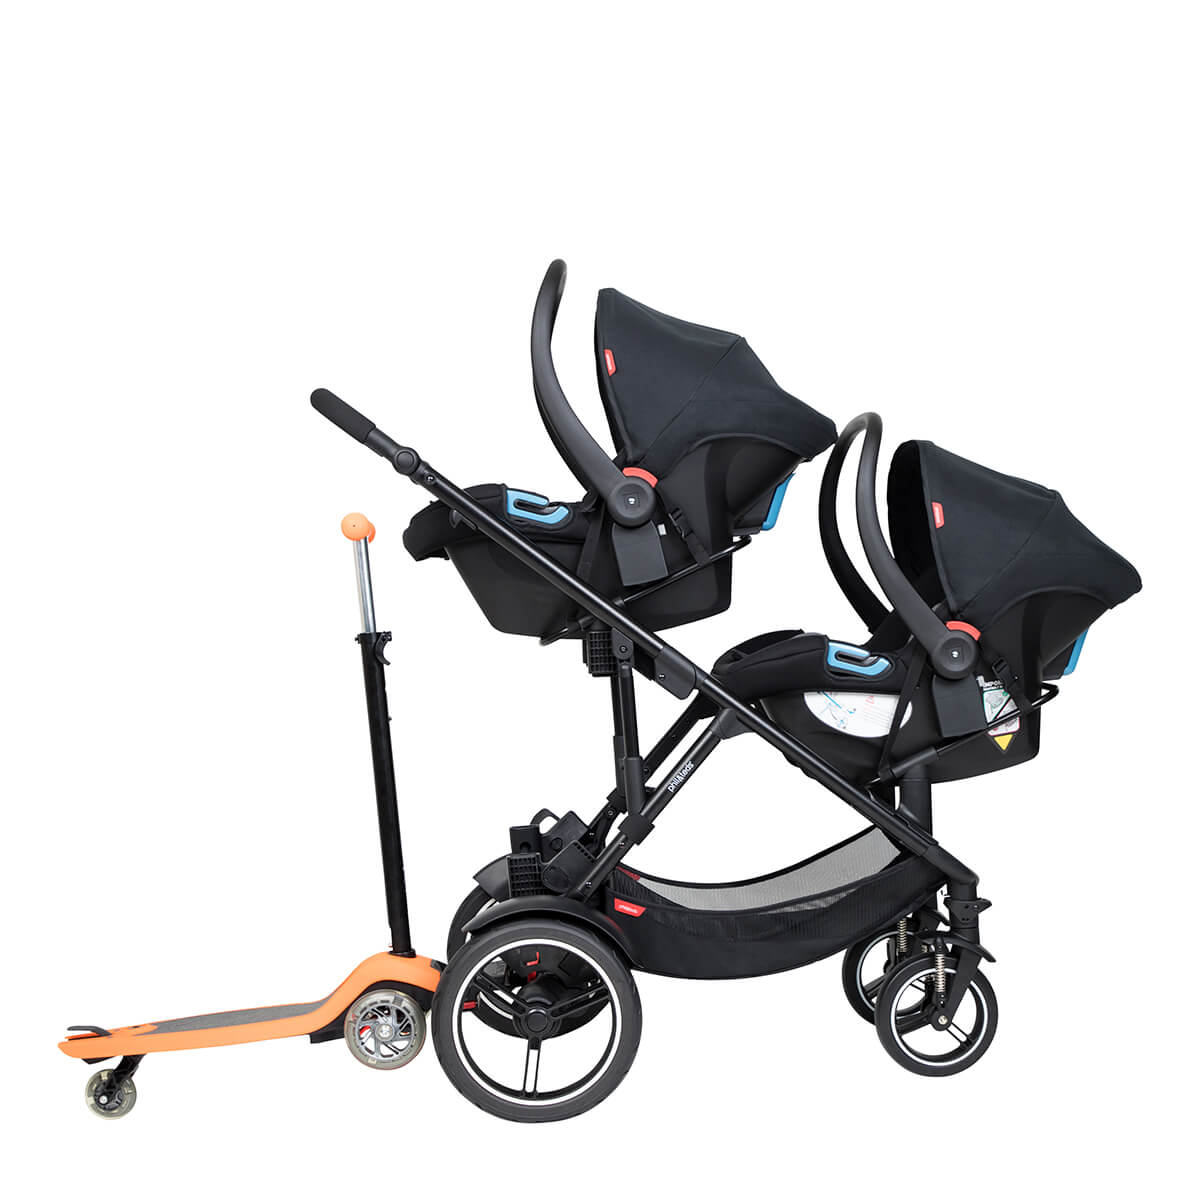 https://cdn.accentuate.io/7749831590082/19466498146498/philteds-voyager-buggy-with-double-travel-systems-and-freerider-stroller-board-in-the-rear-v1700693751210.jpg?1200x1200